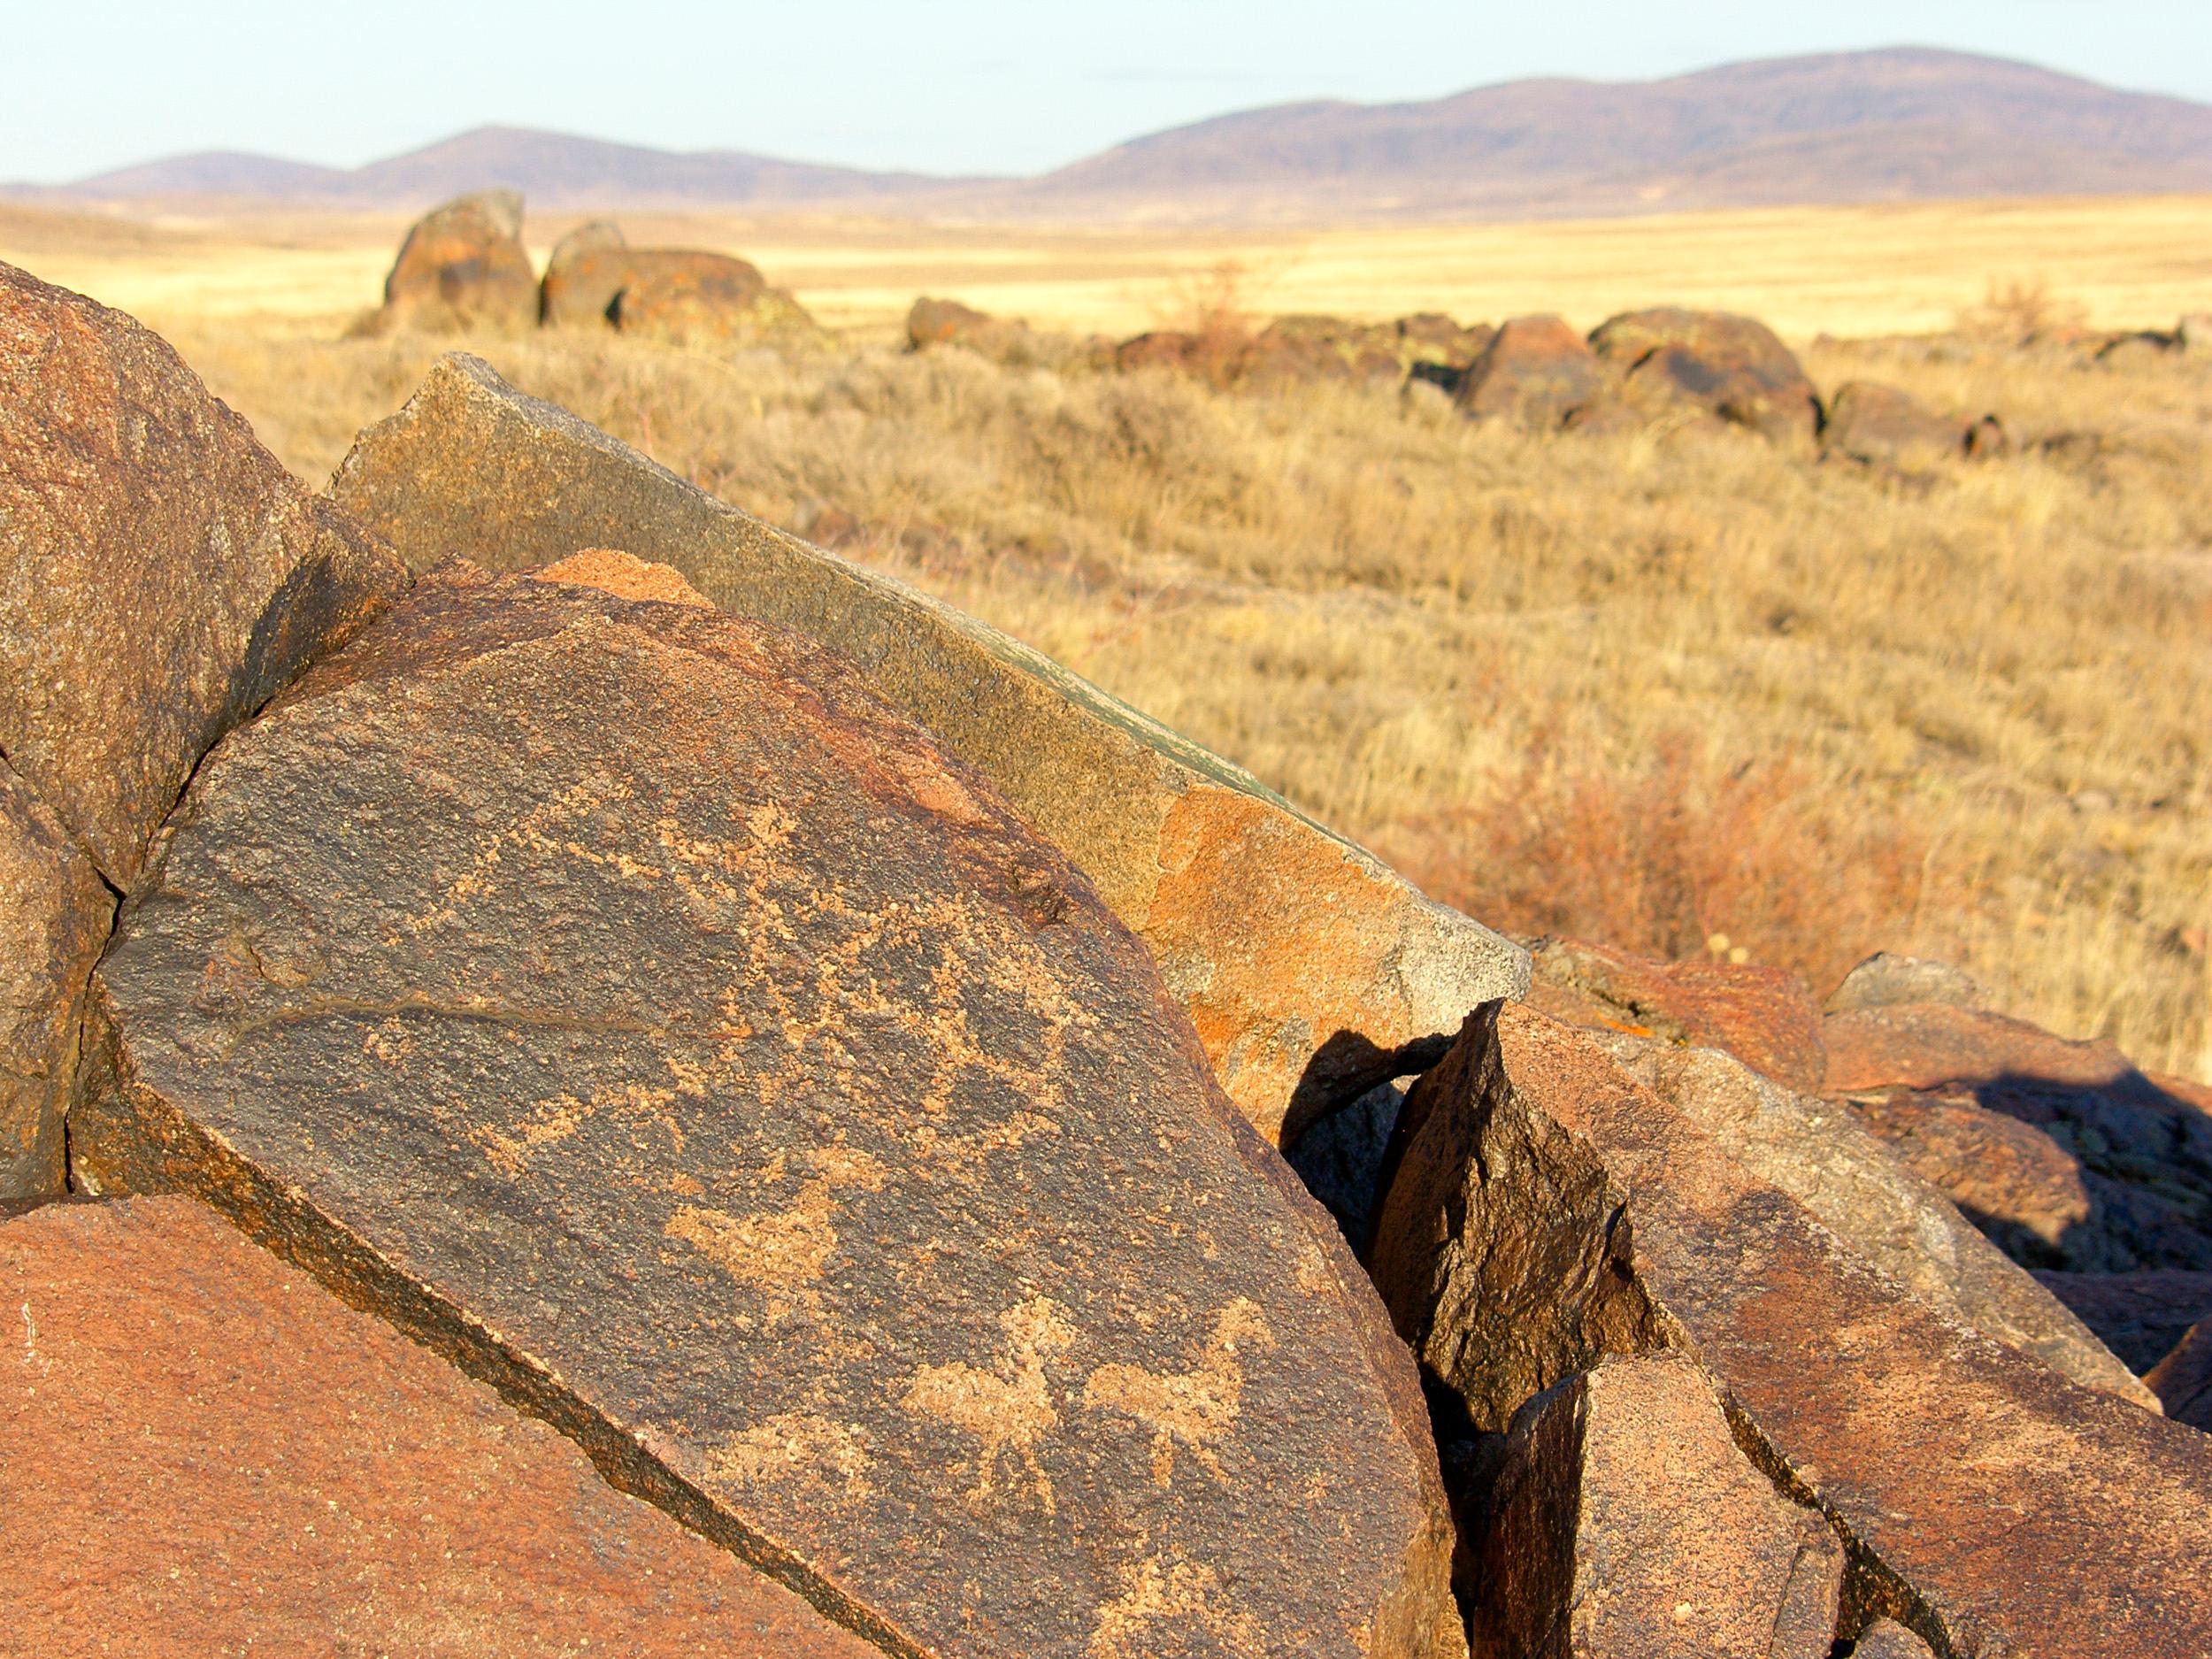 Ancient rock carvings from early nomads